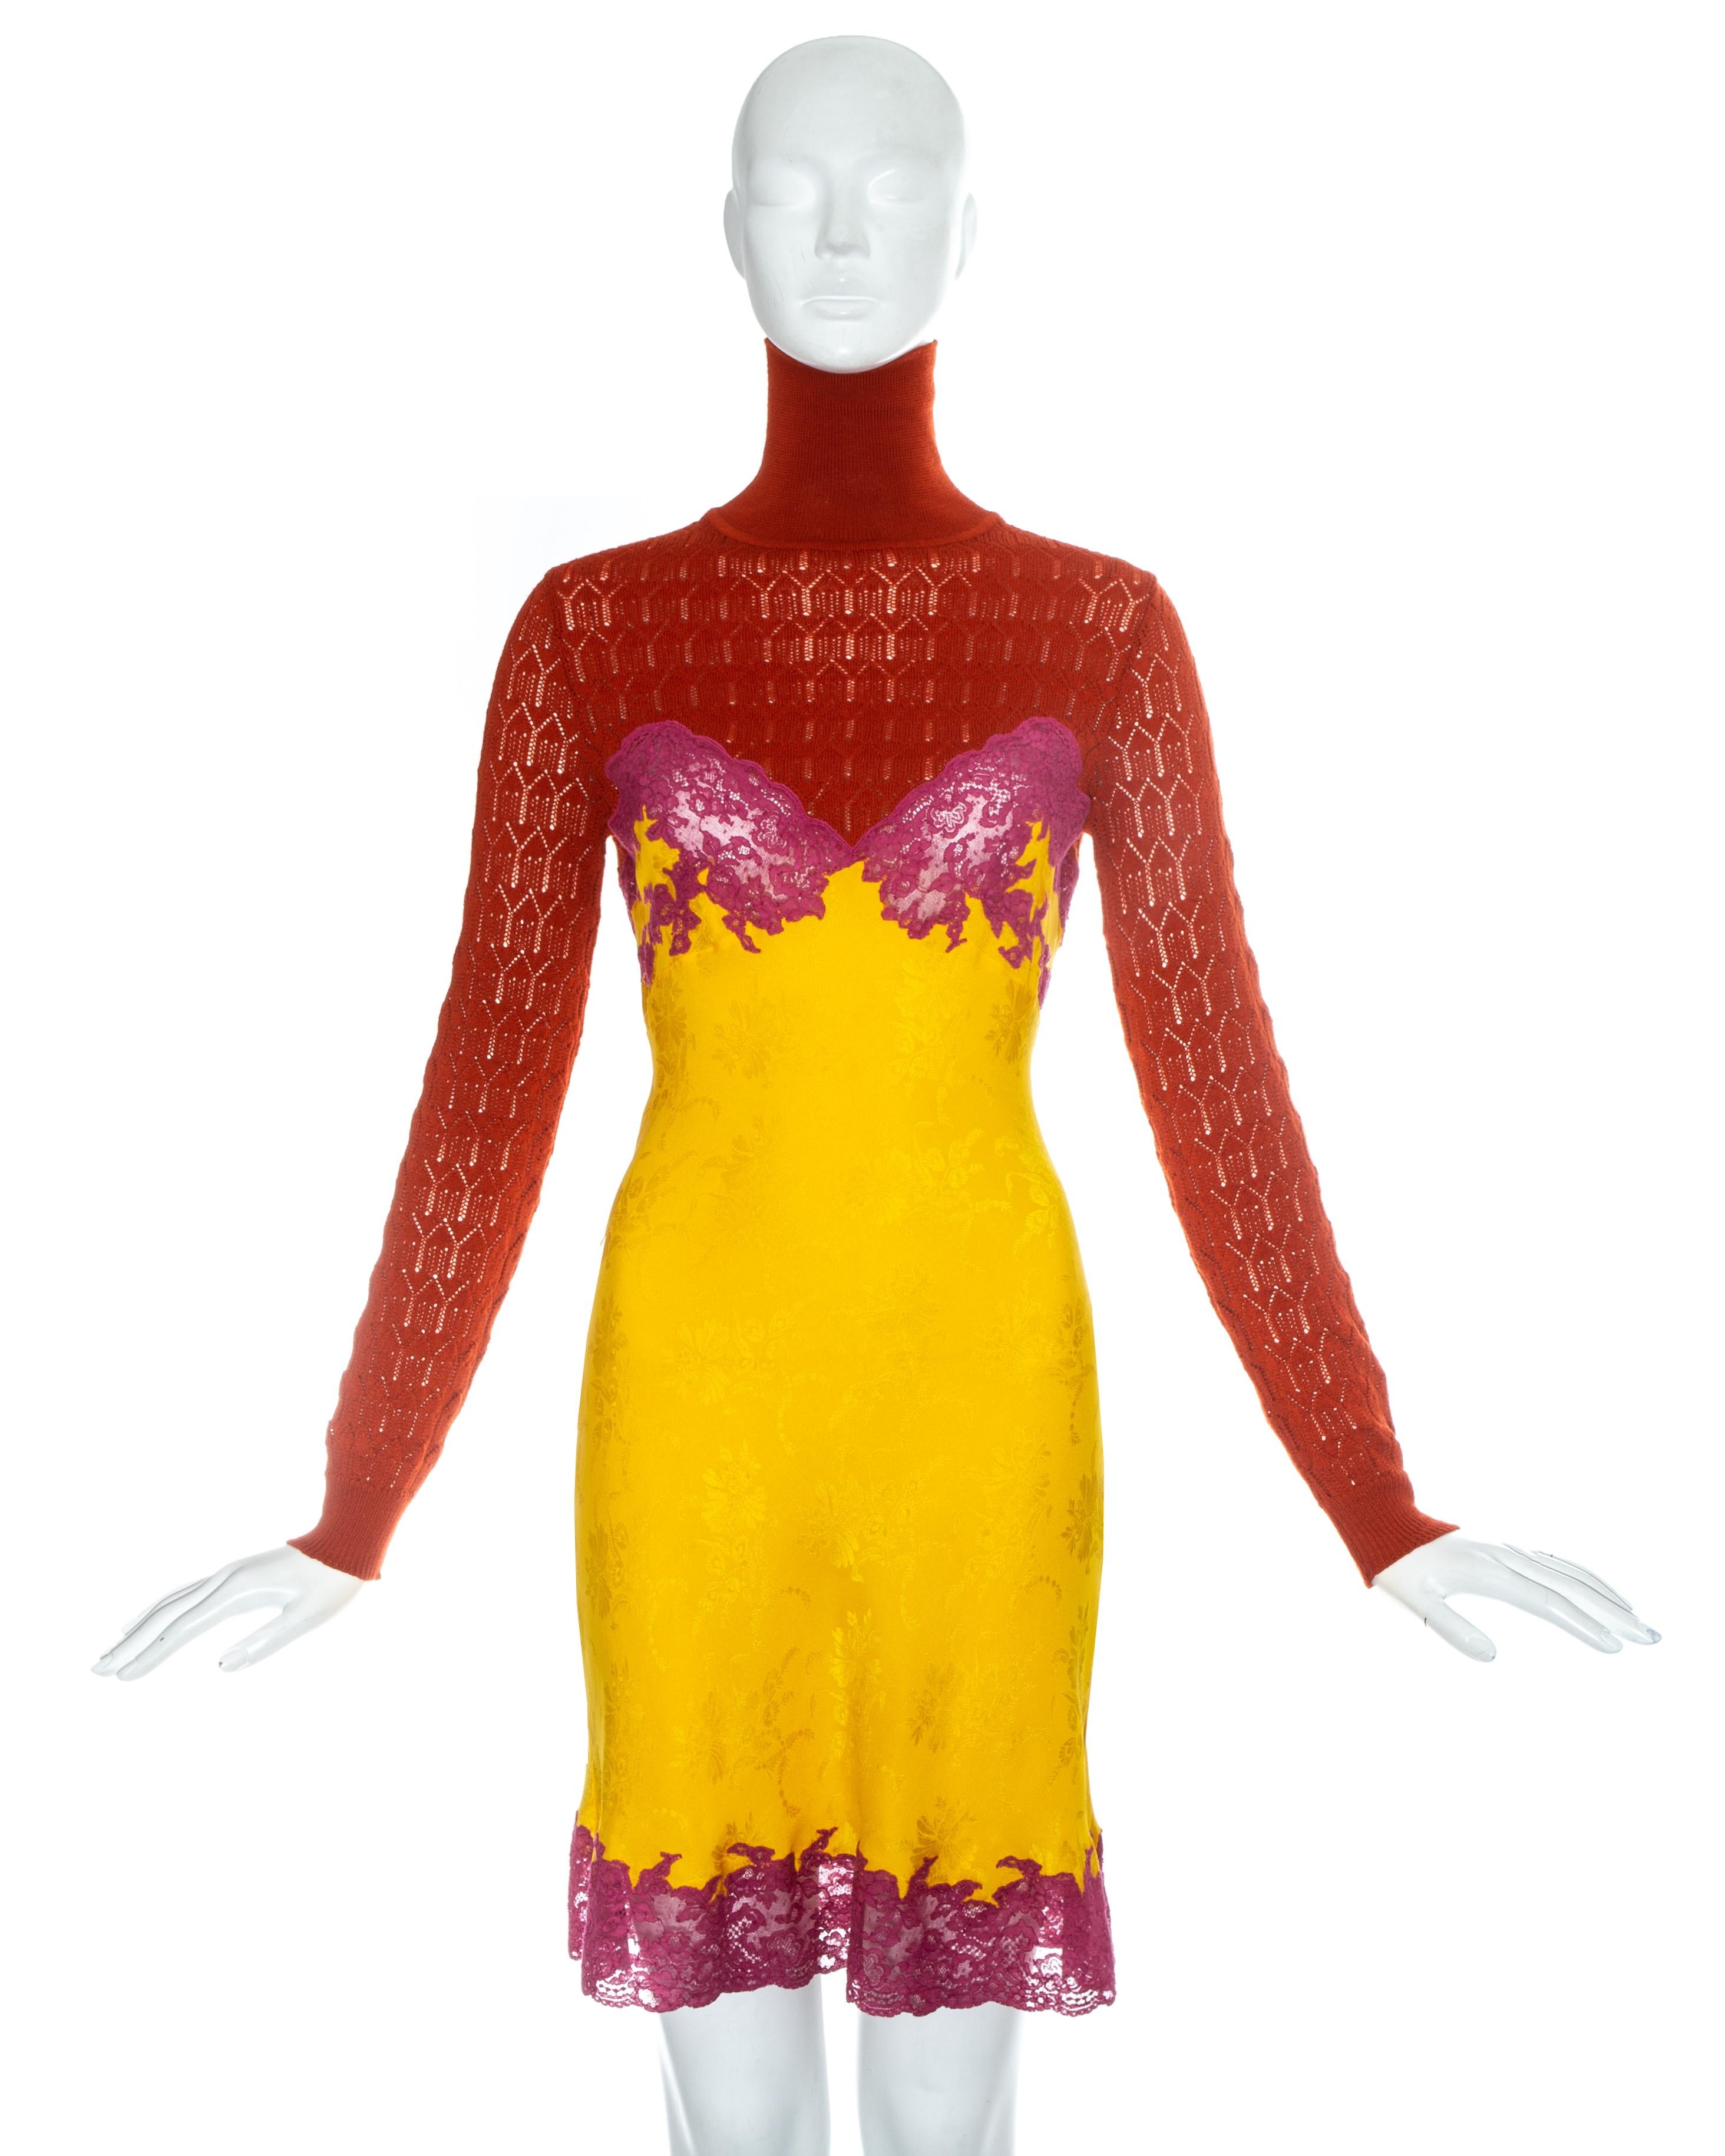 Christian Dior by John Galliano; lingerie inspired evening dress with red crochet knit turtle neck sweater and yellow silk dress with hot pink lace inserts. 

Fall-Winter 1998